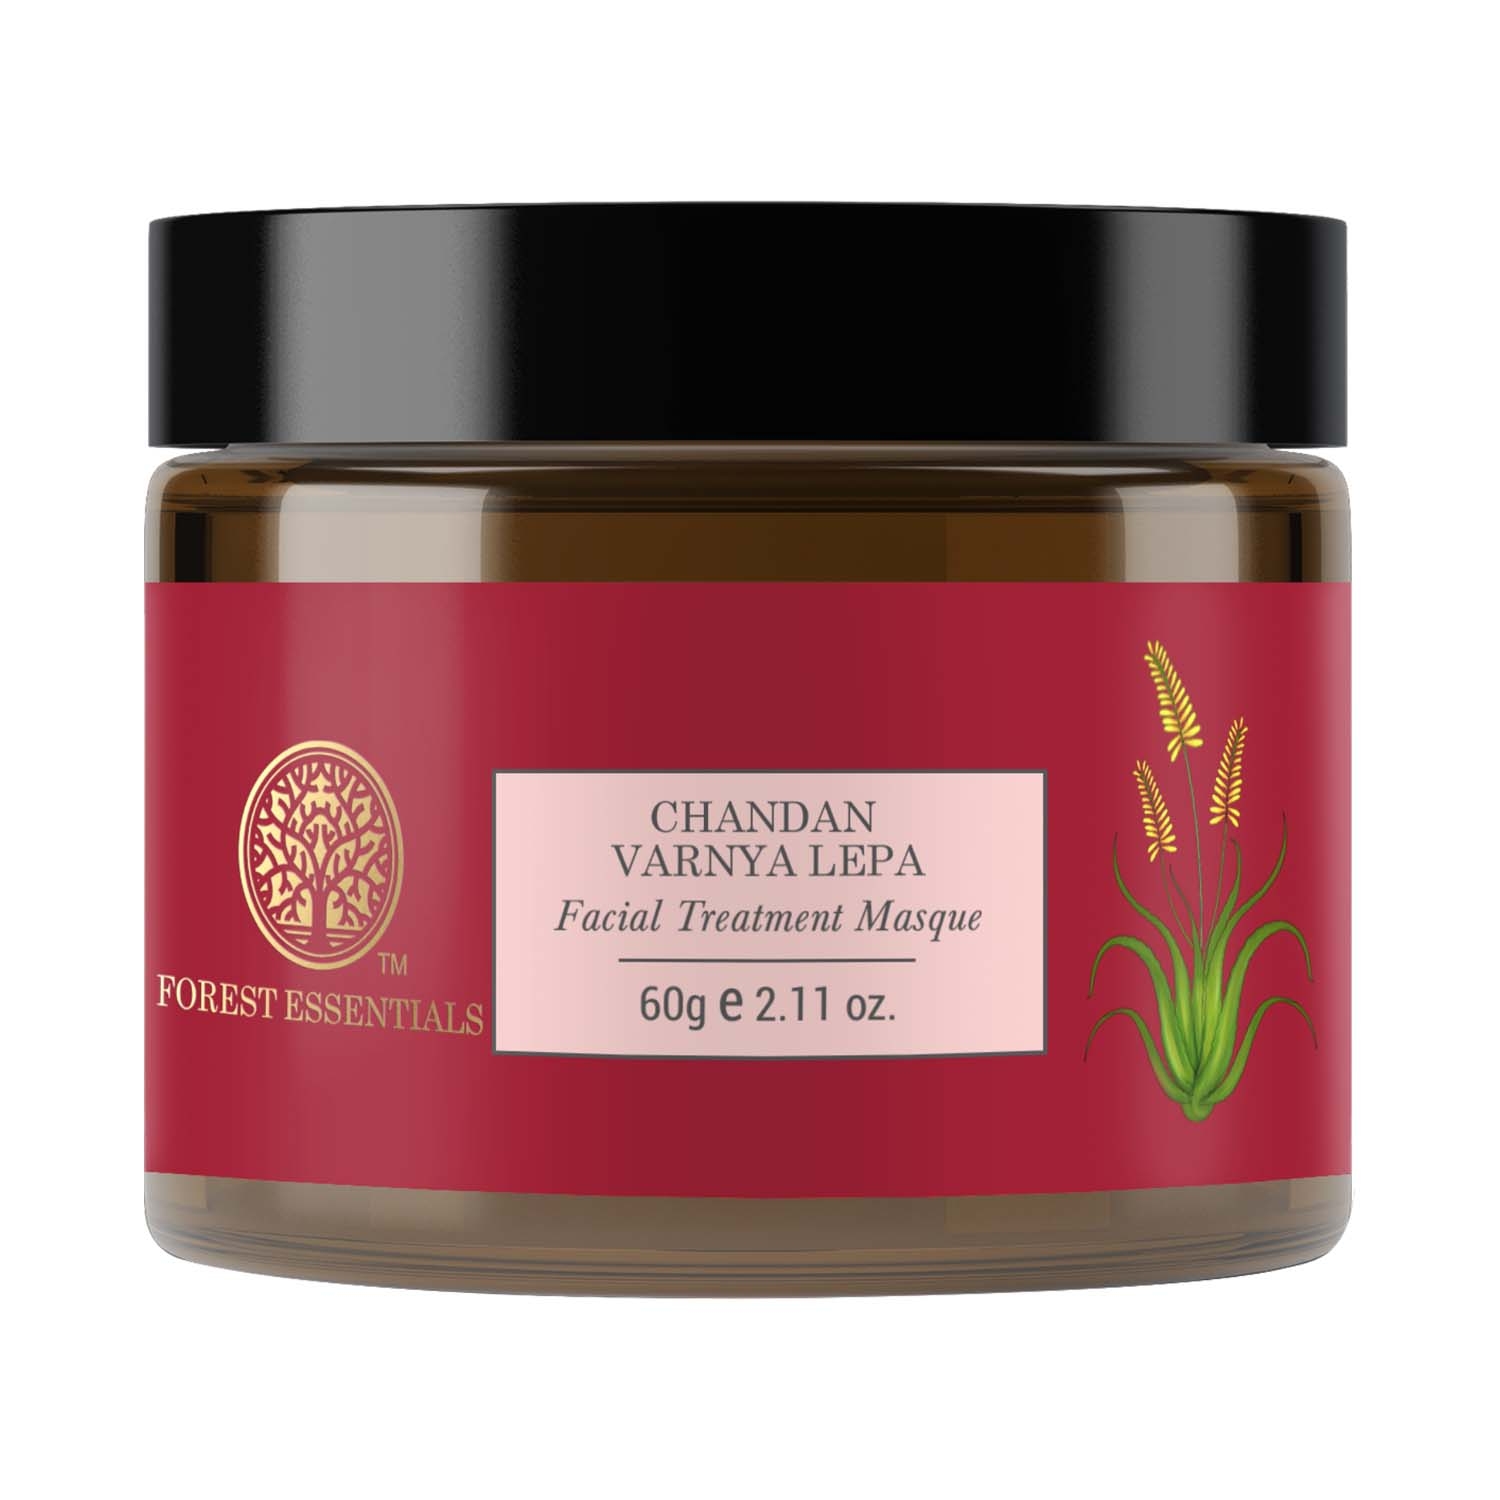 Forest Essentials | Forest Essentials Chandan Varnya Lepa Facial Masque for Firm & Hydrated Skin (60g)